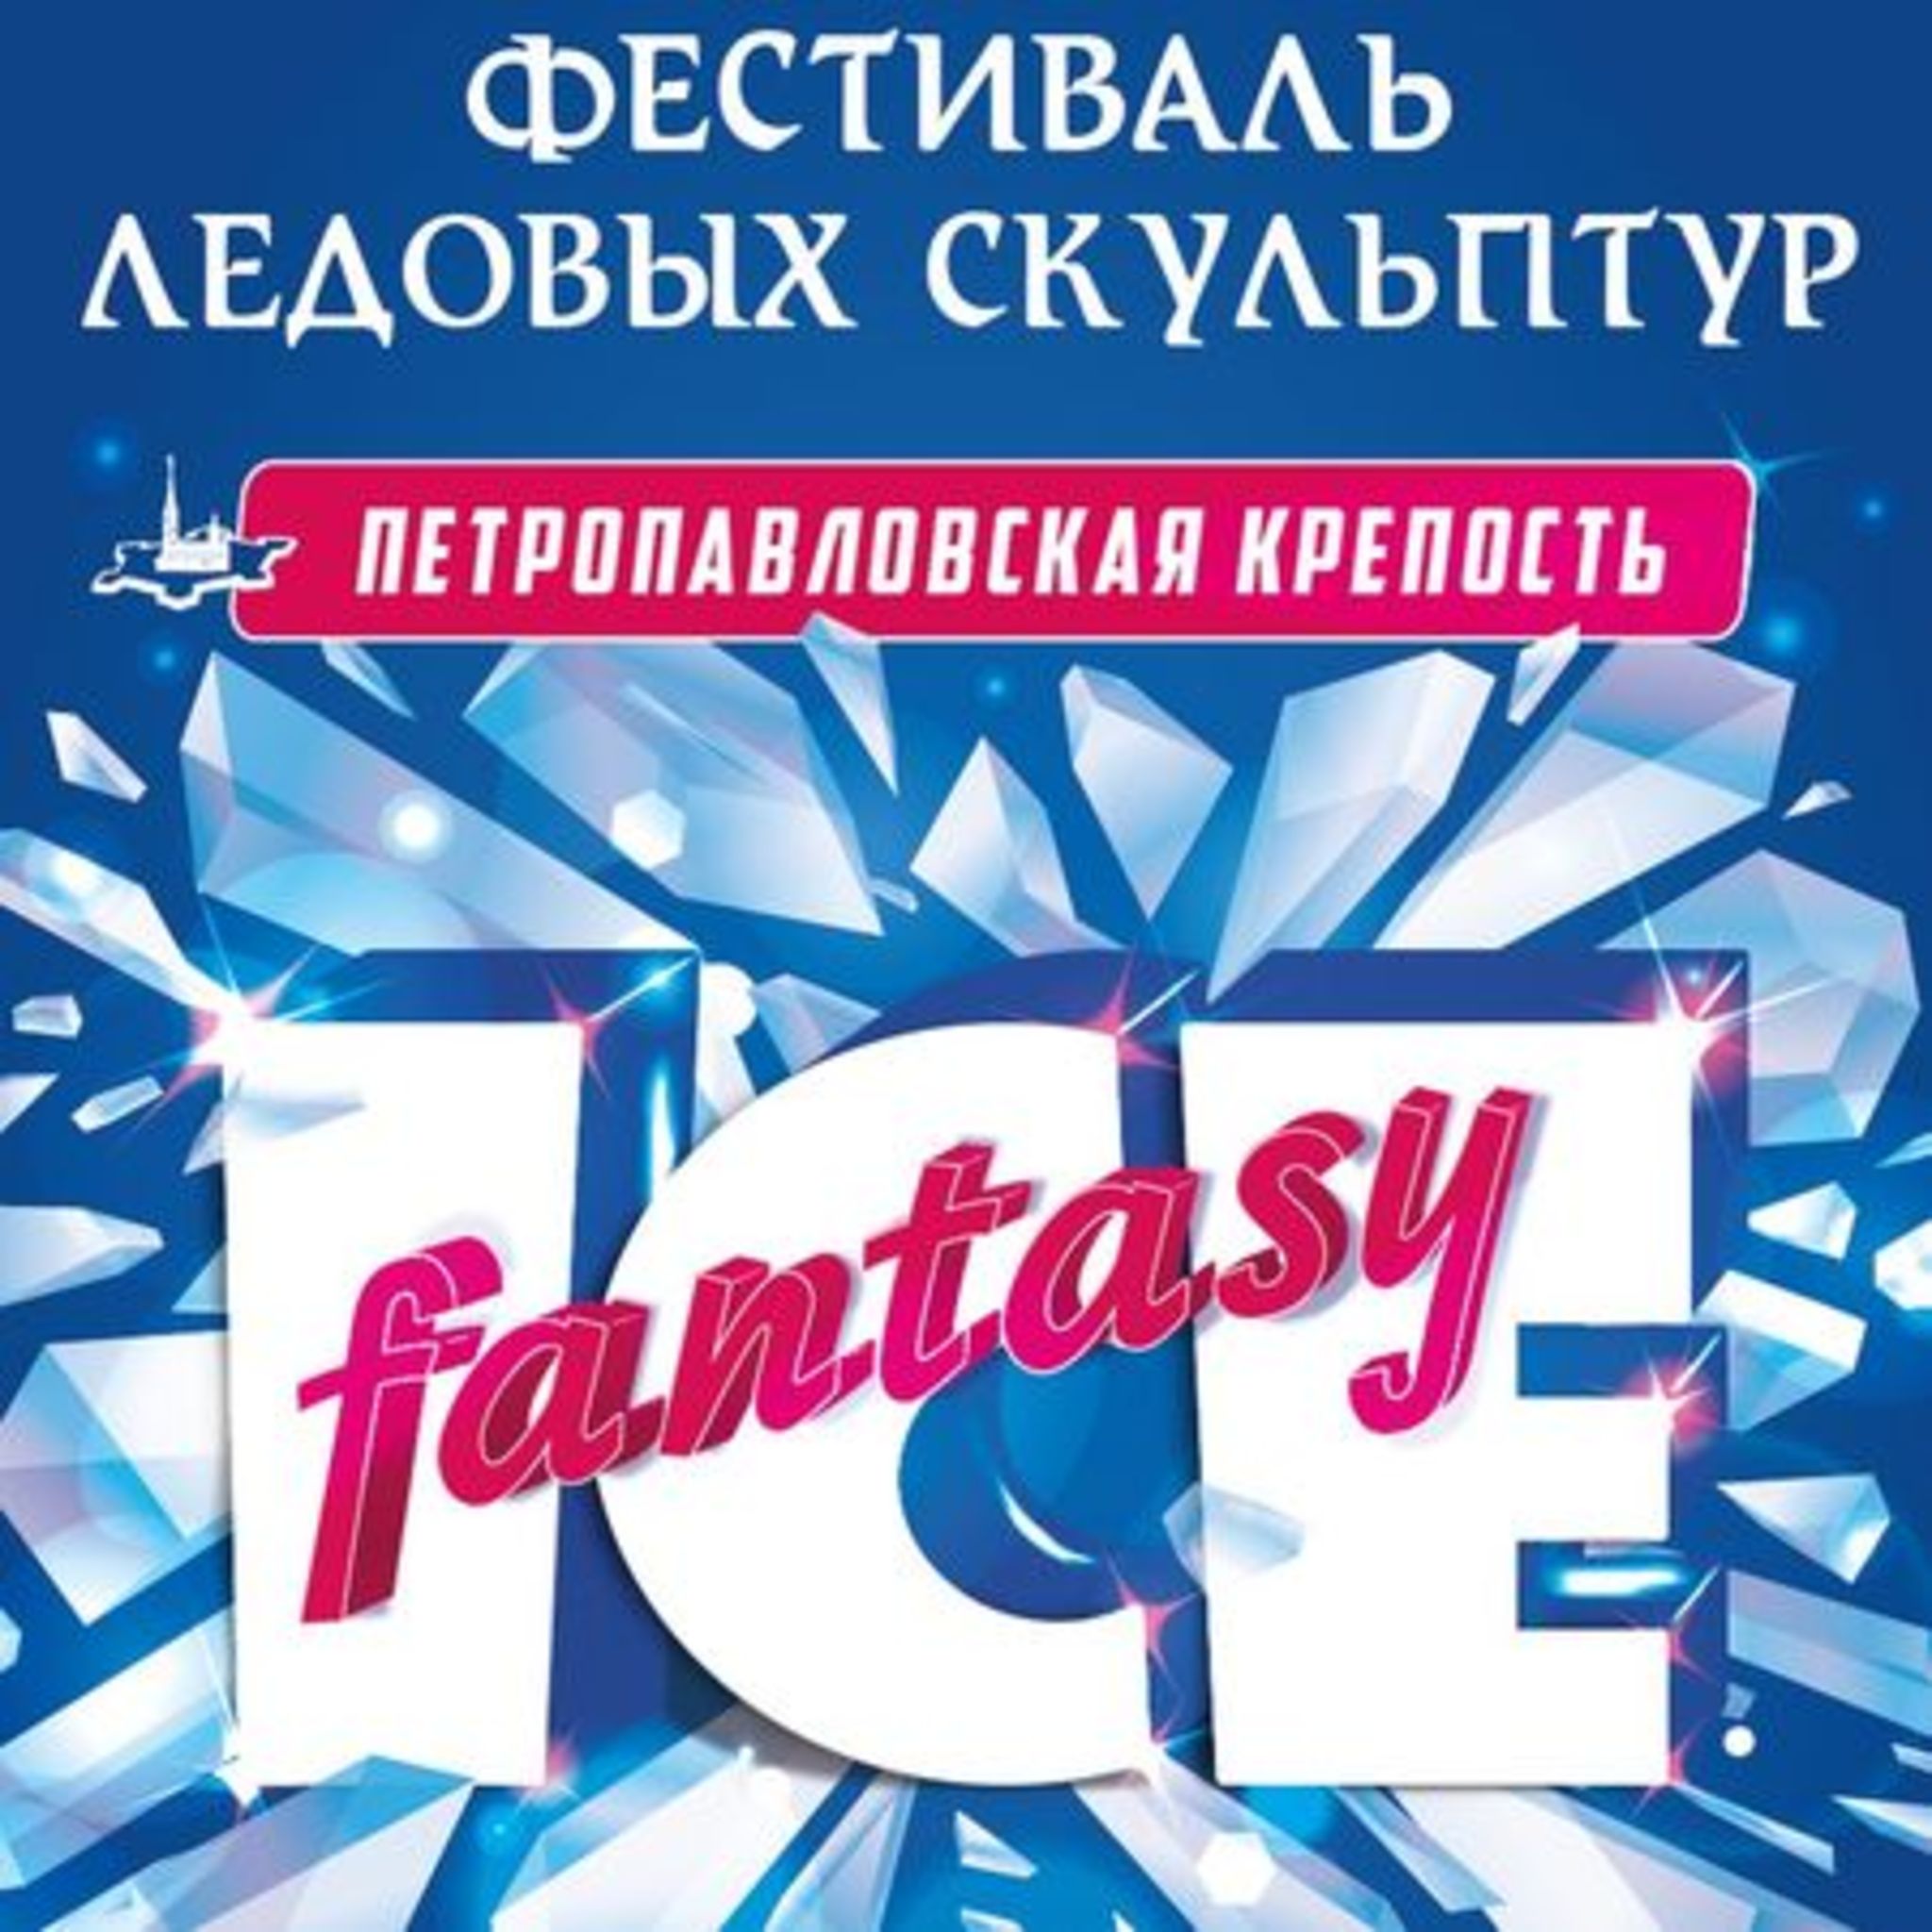 Festival of ice sculptures in the fortress ICE fantasy